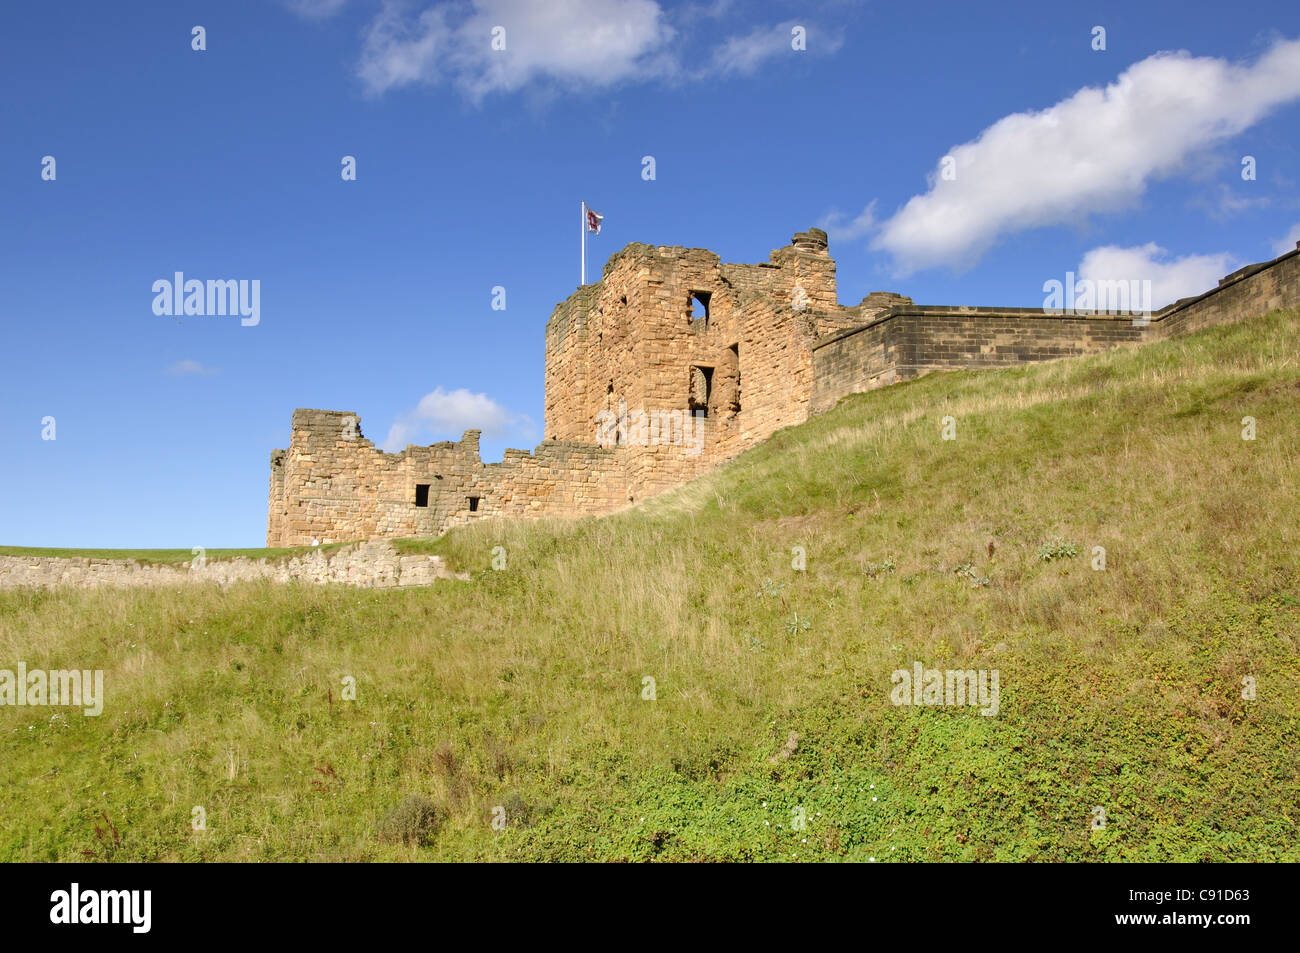 Tynemouth Castle is on a rocky headland (known as Pen Bal Crag) overlooking Tynemouth Pier and beach. The castle dates from the Stock Photo